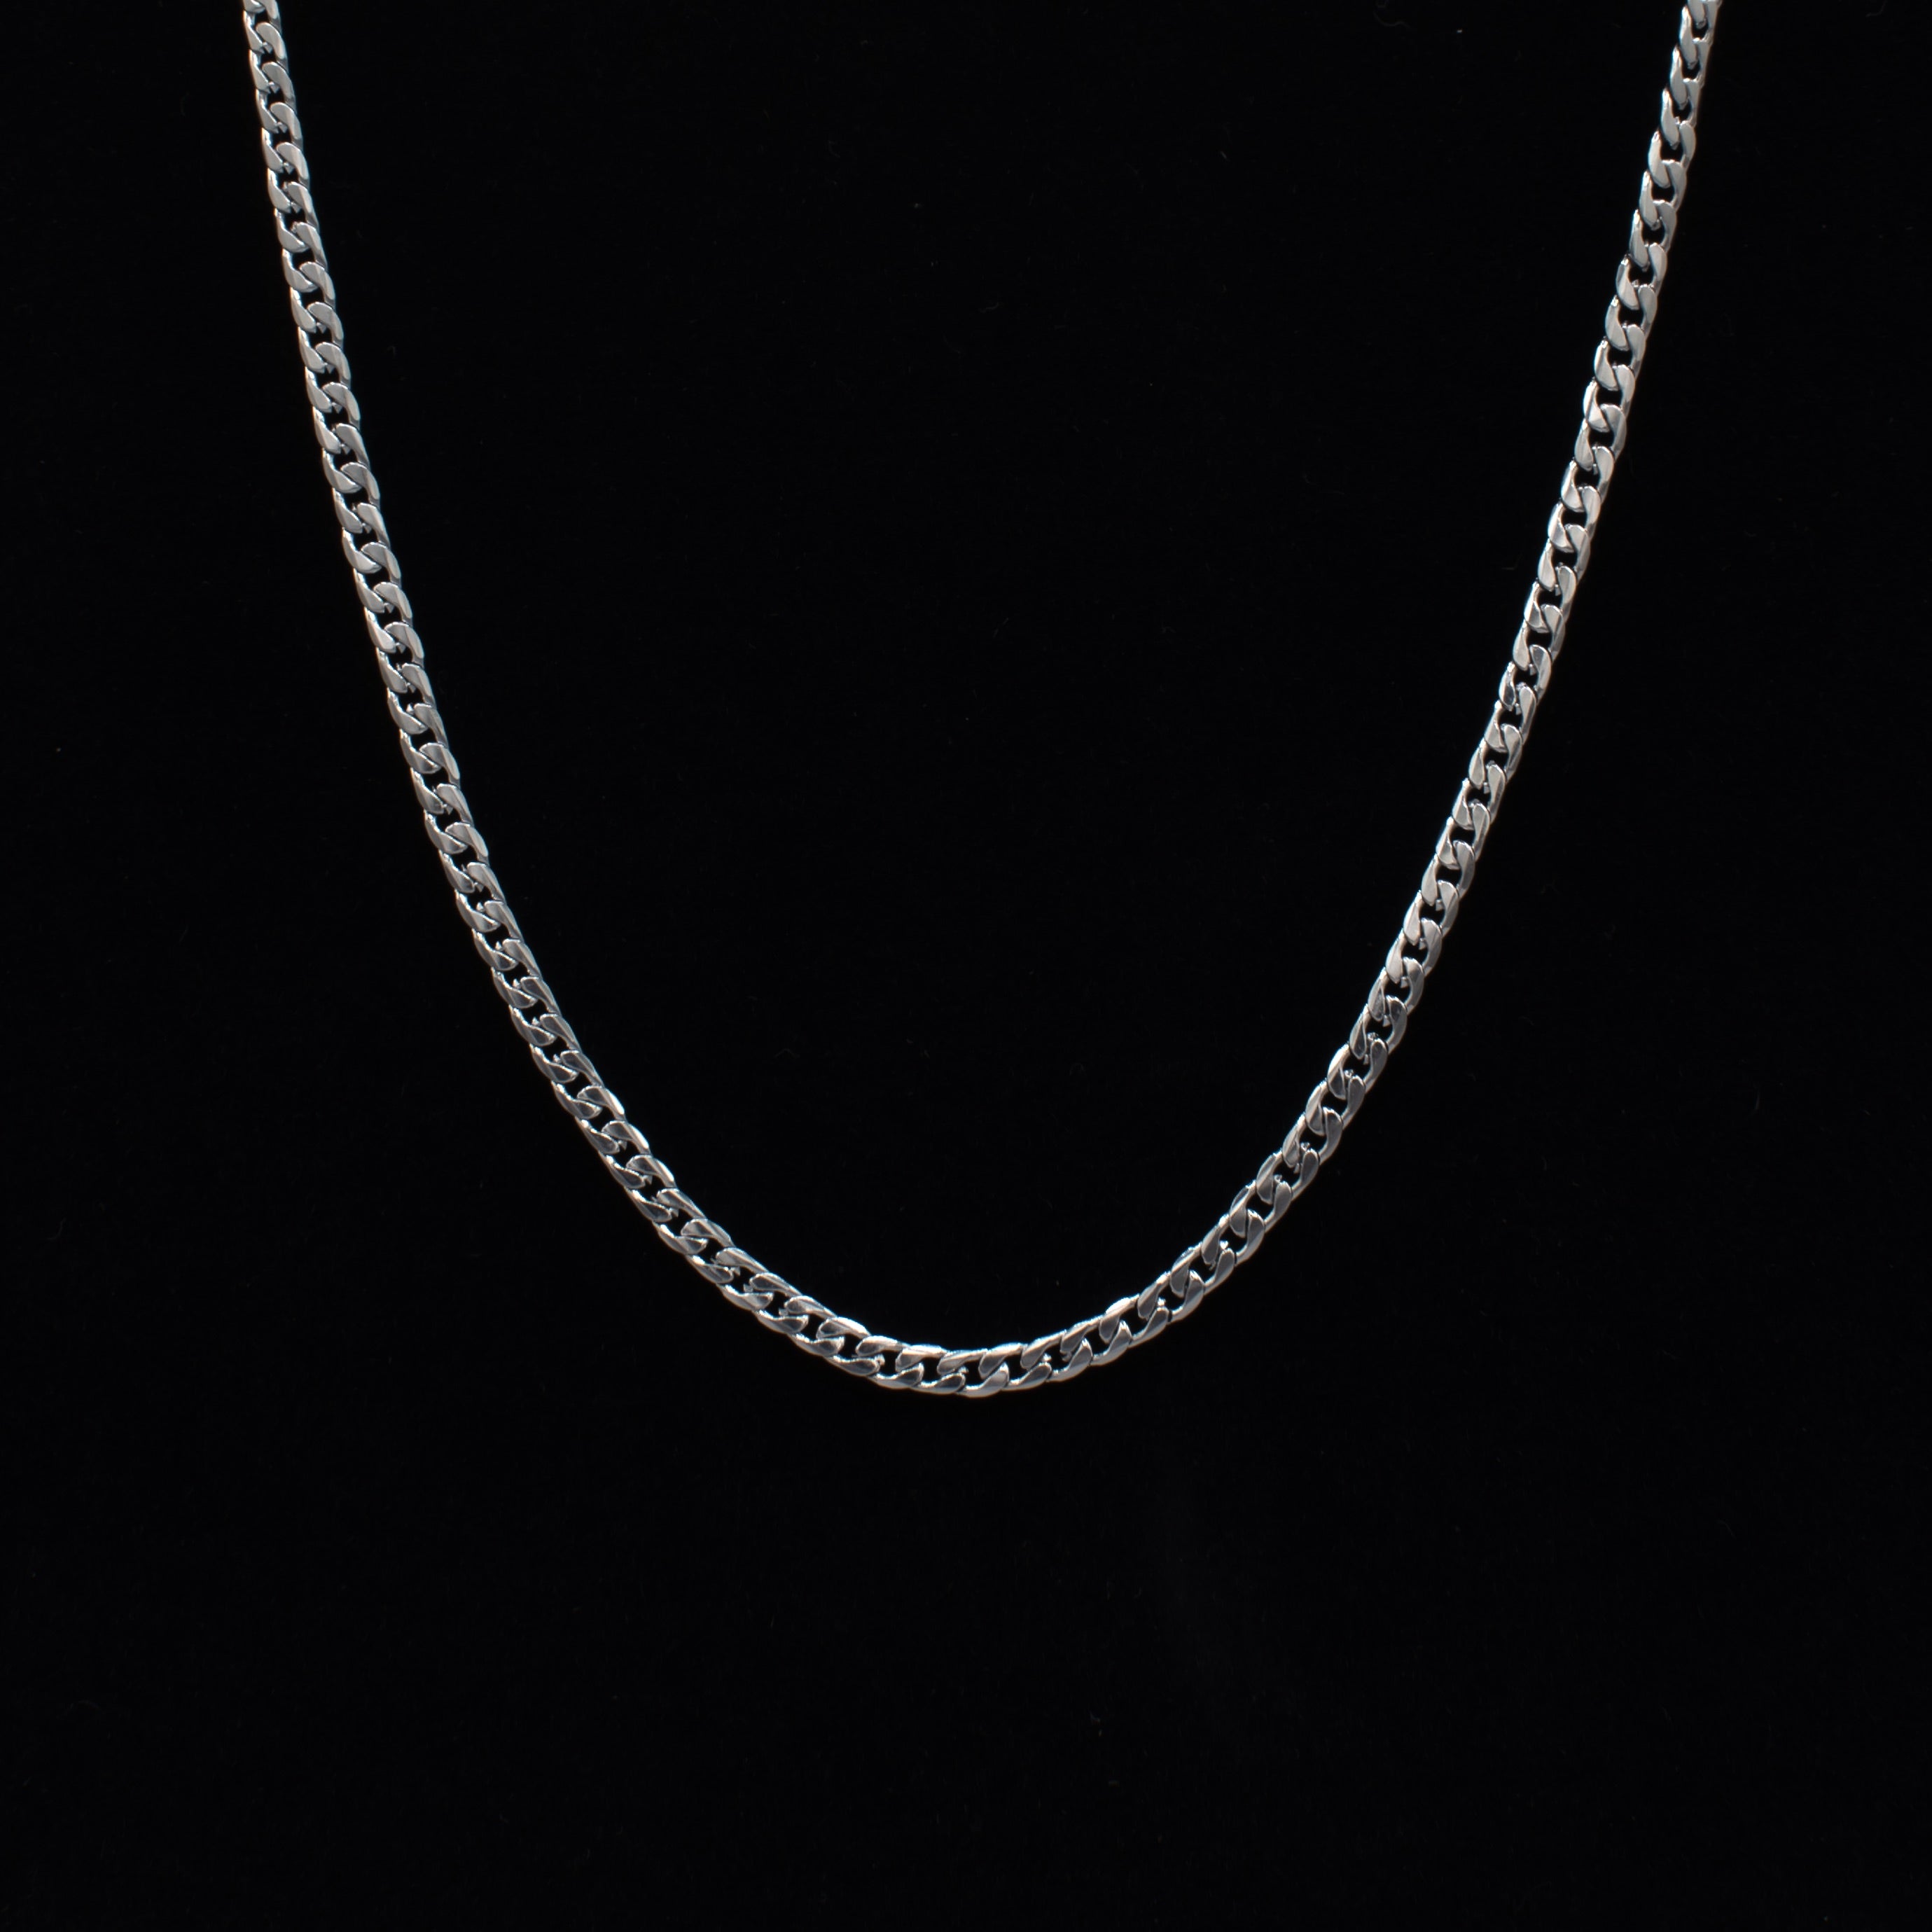 Silver Cuban Link Necklace - 4mm